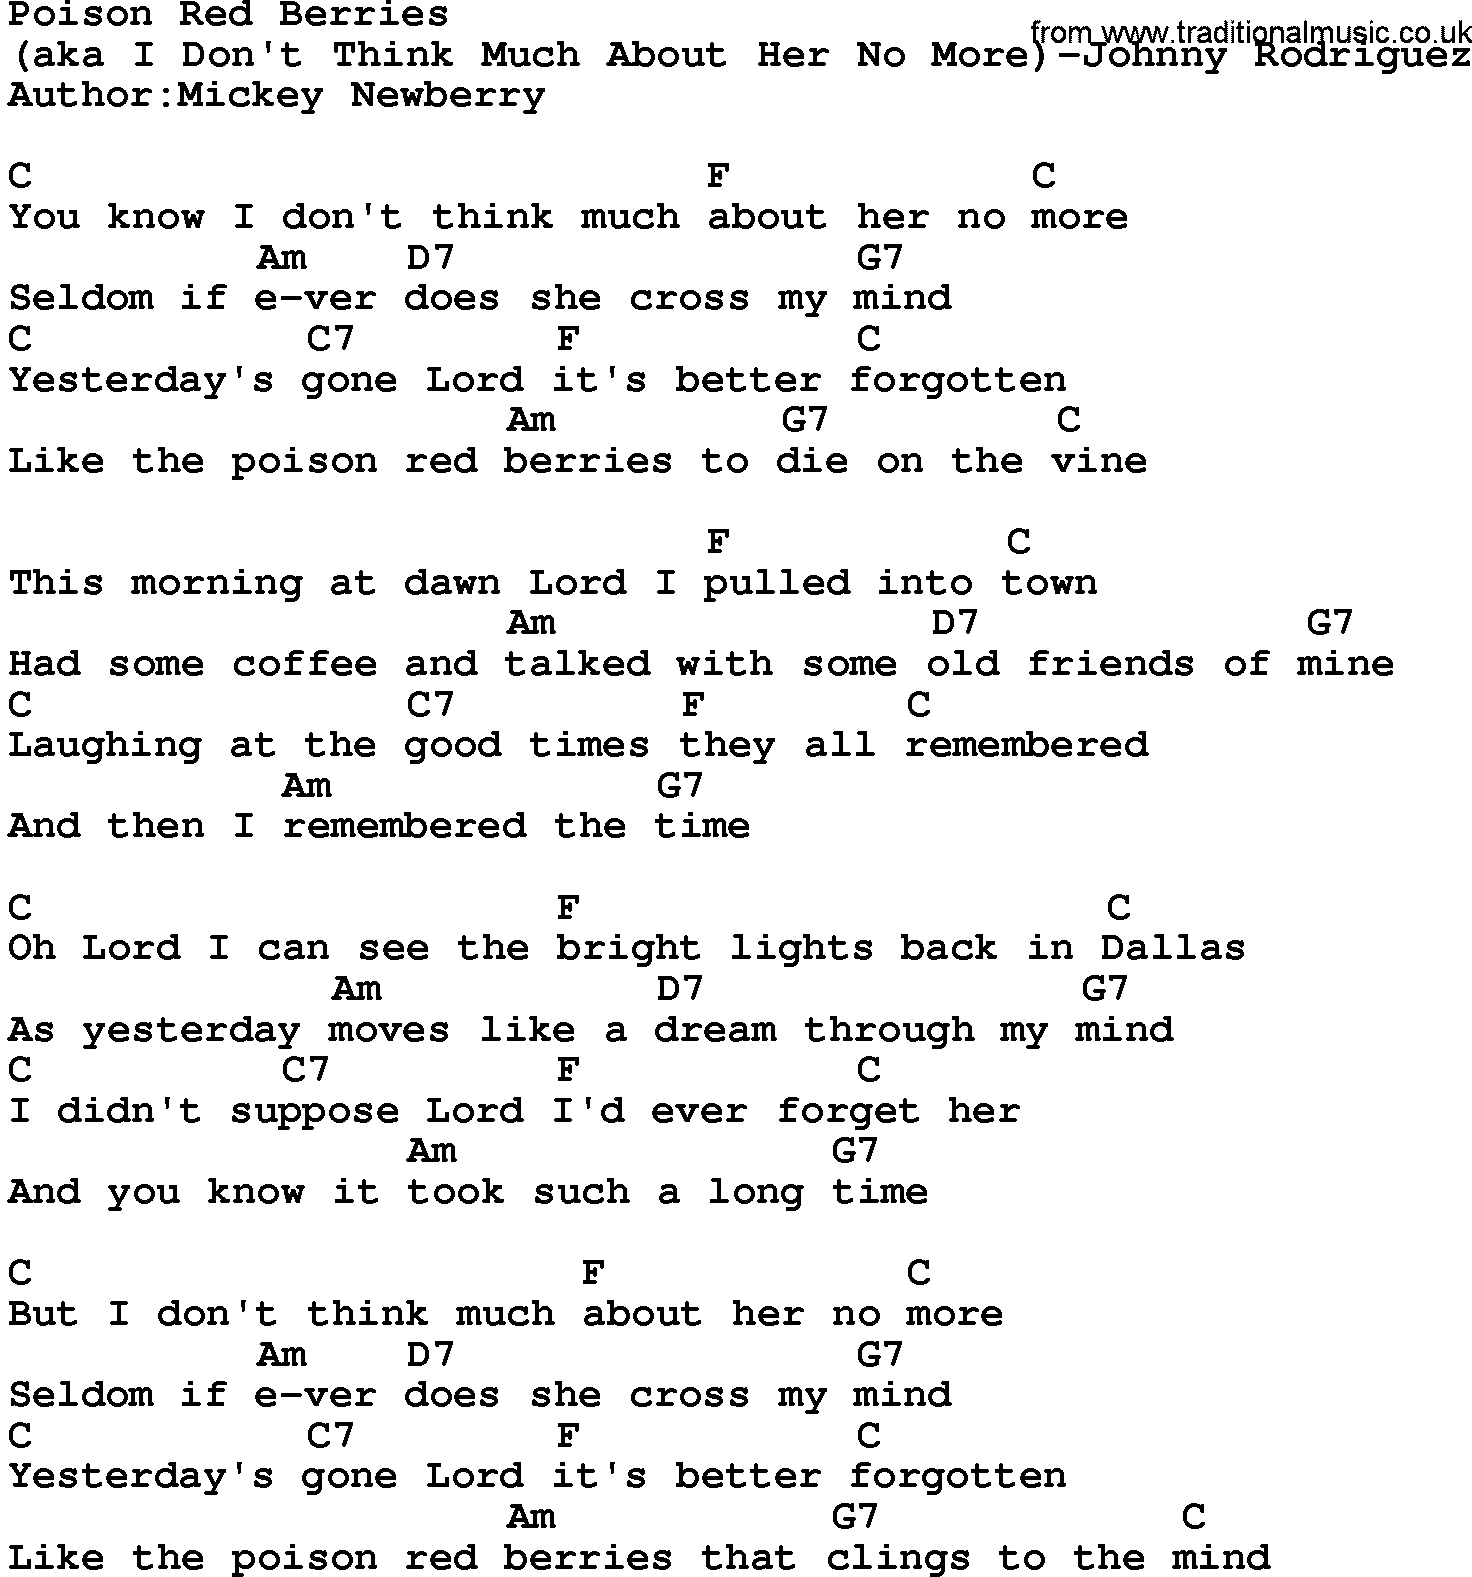 Country music song: Poison Red Berries lyrics and chords